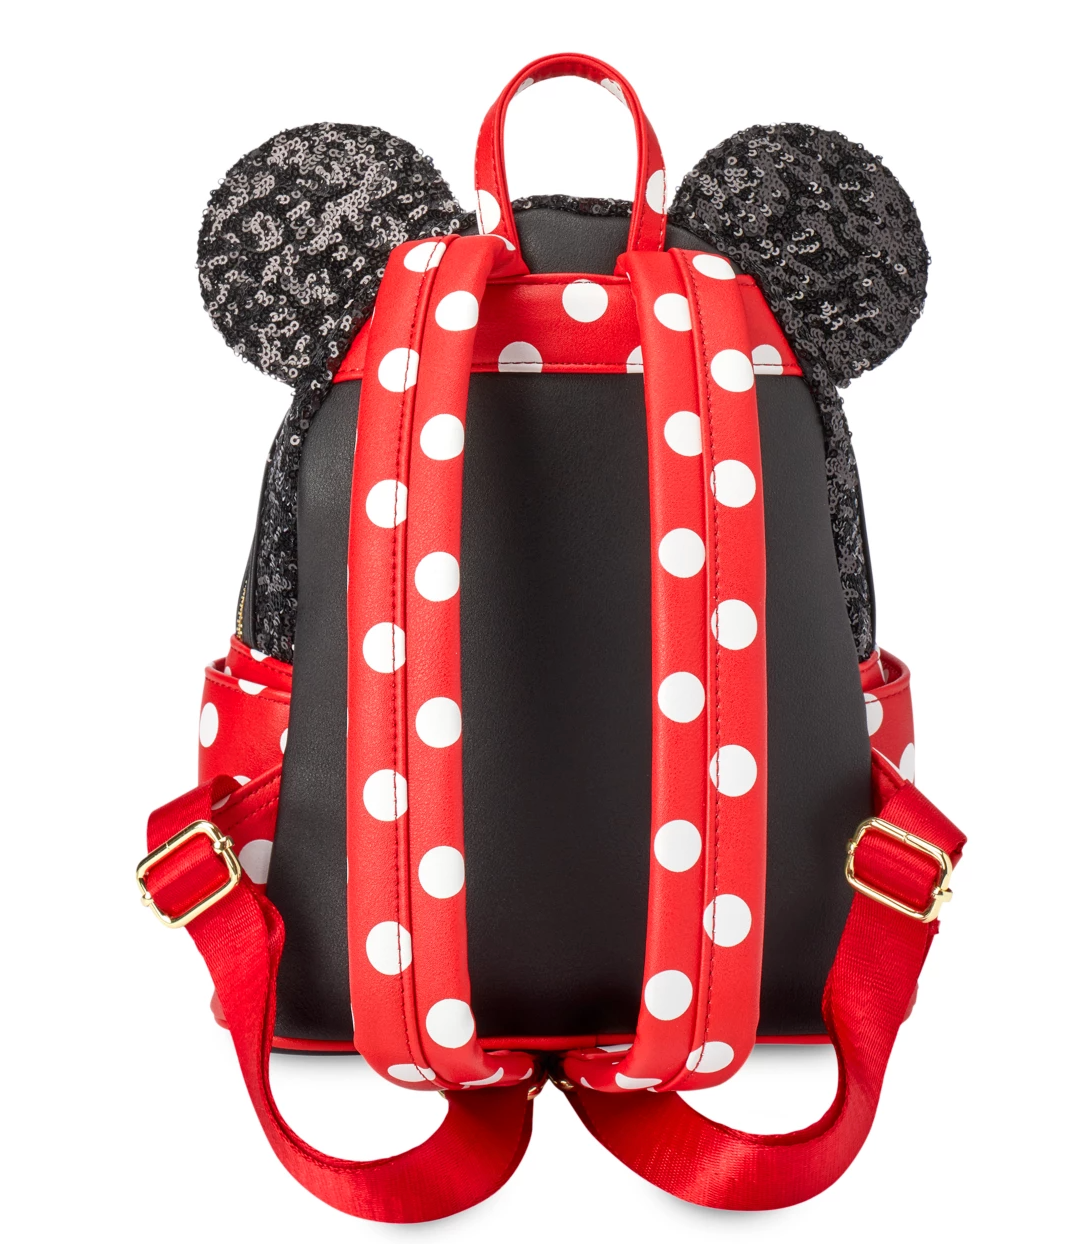 Disney Parks Minnie Sequin and Polka Dot Mini Backpack New with Tag